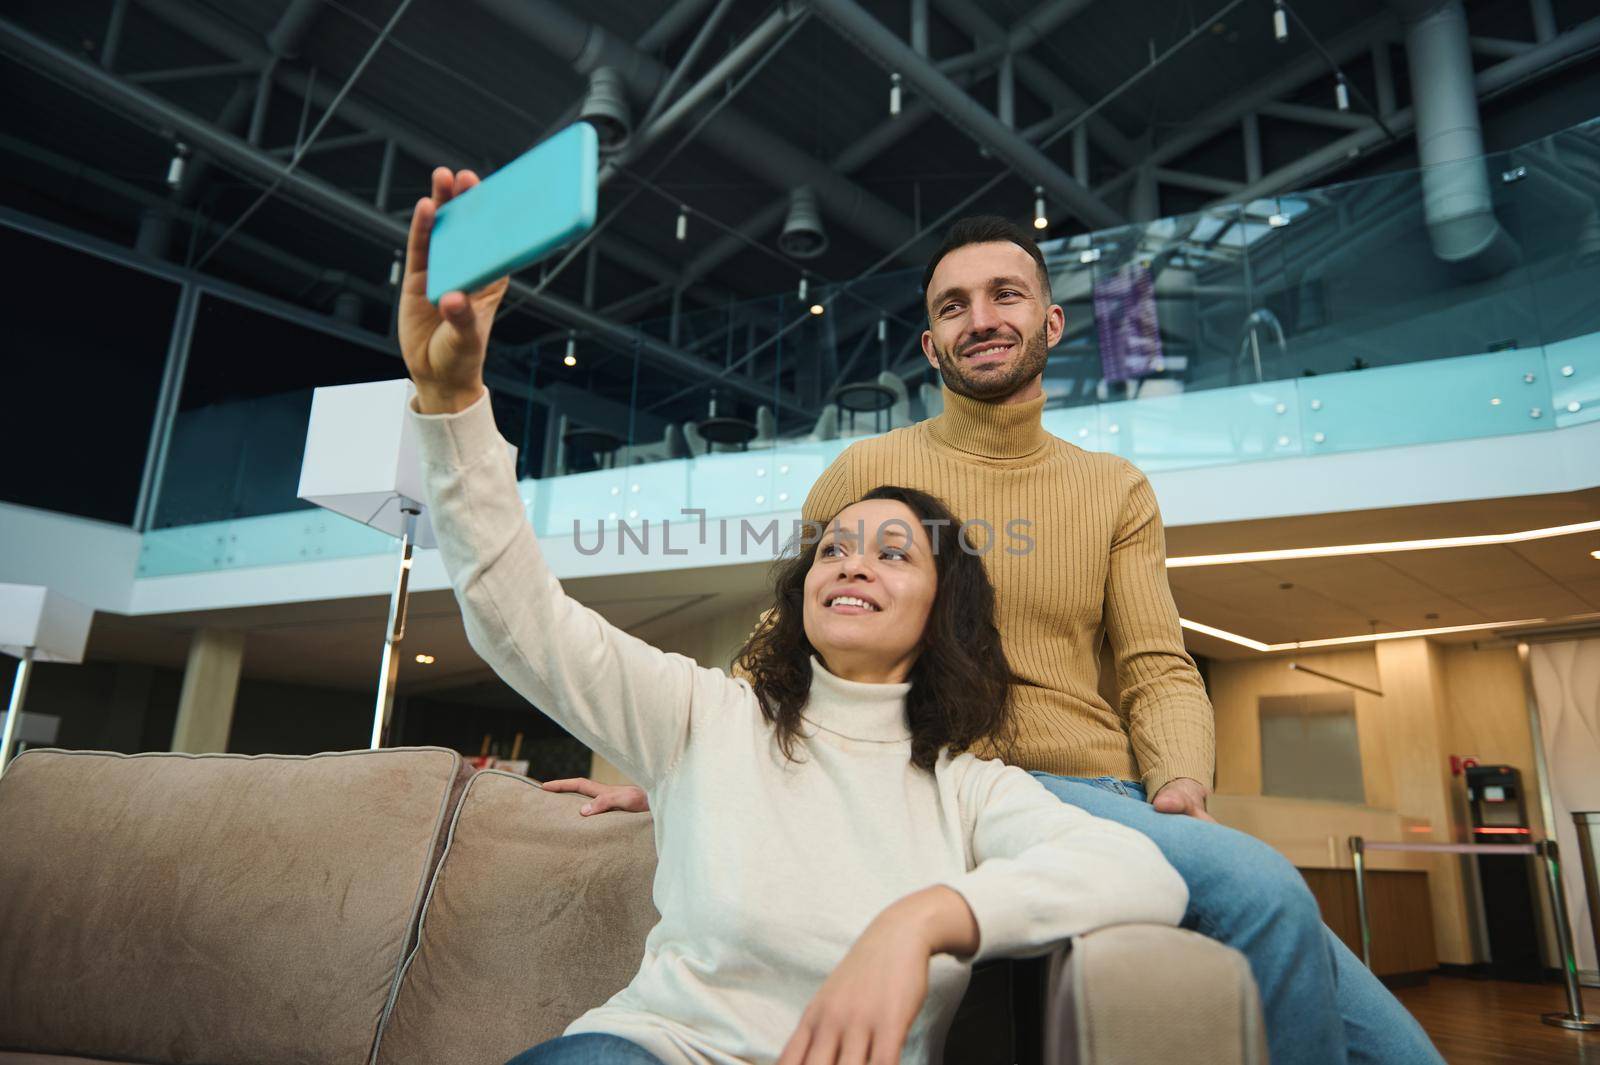 Beautiful young loving couple of newlyweds on their honeymoon trip making a self-portrait selfie on a smartphone while relaxing together in the airport lounge while waiting for boarding a flight.